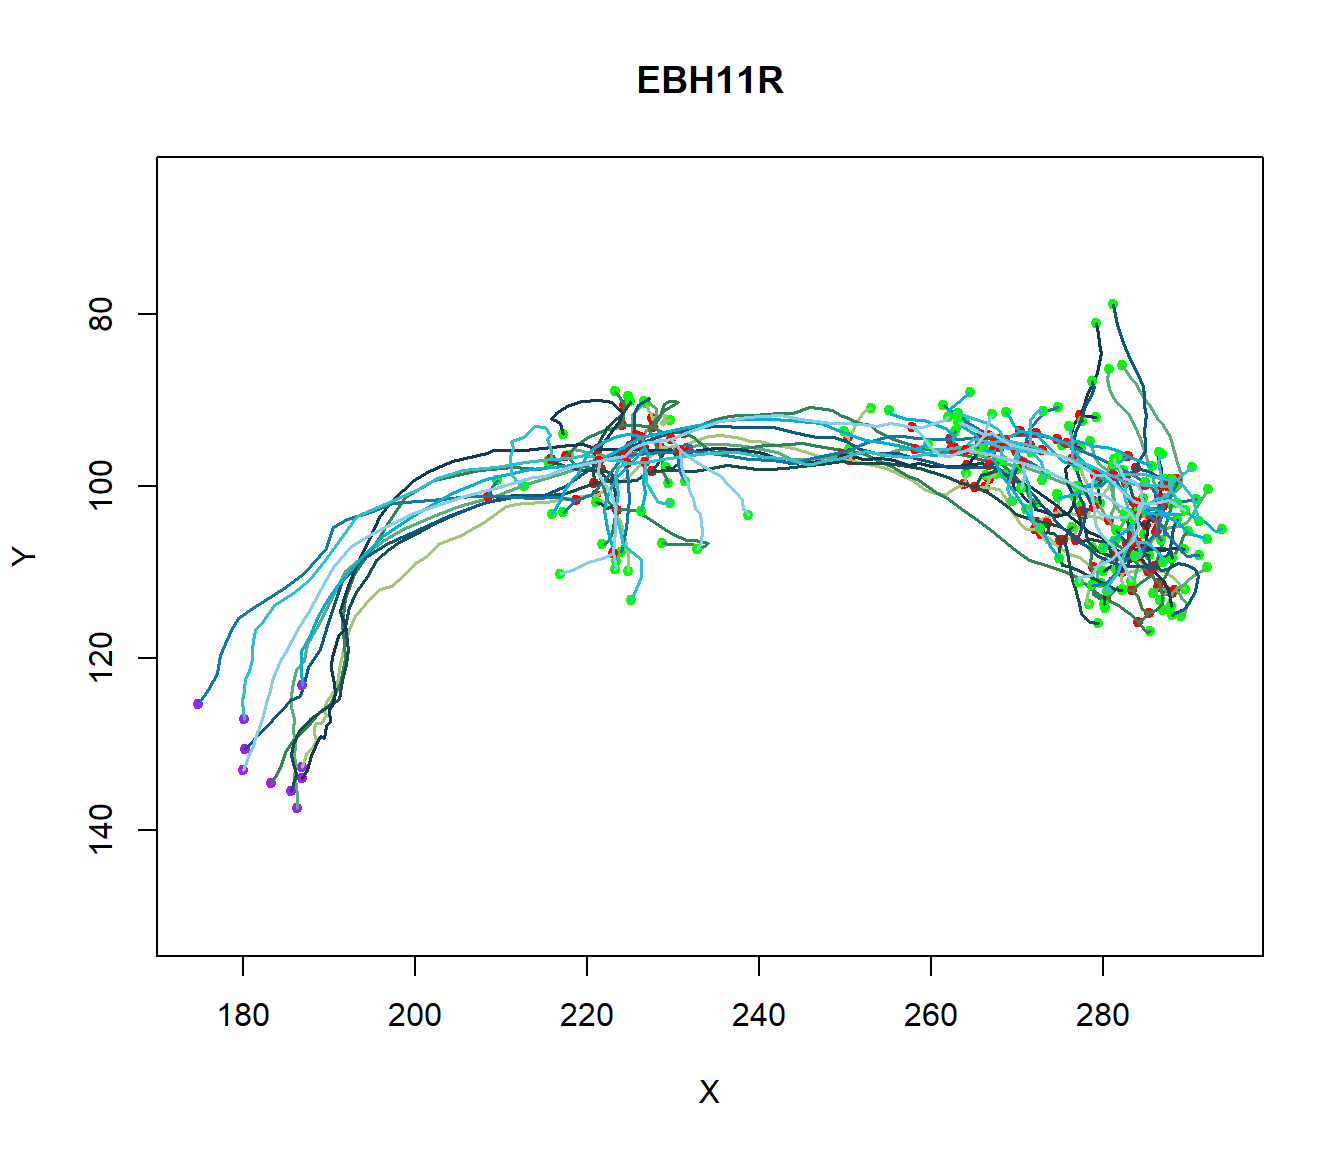 Figure  6: Axonal and Dendritic geometry. Plot of Several Neurons to illustrate the diversity in axonal and dendritic geometry between excitatory and inhibitory cell types.